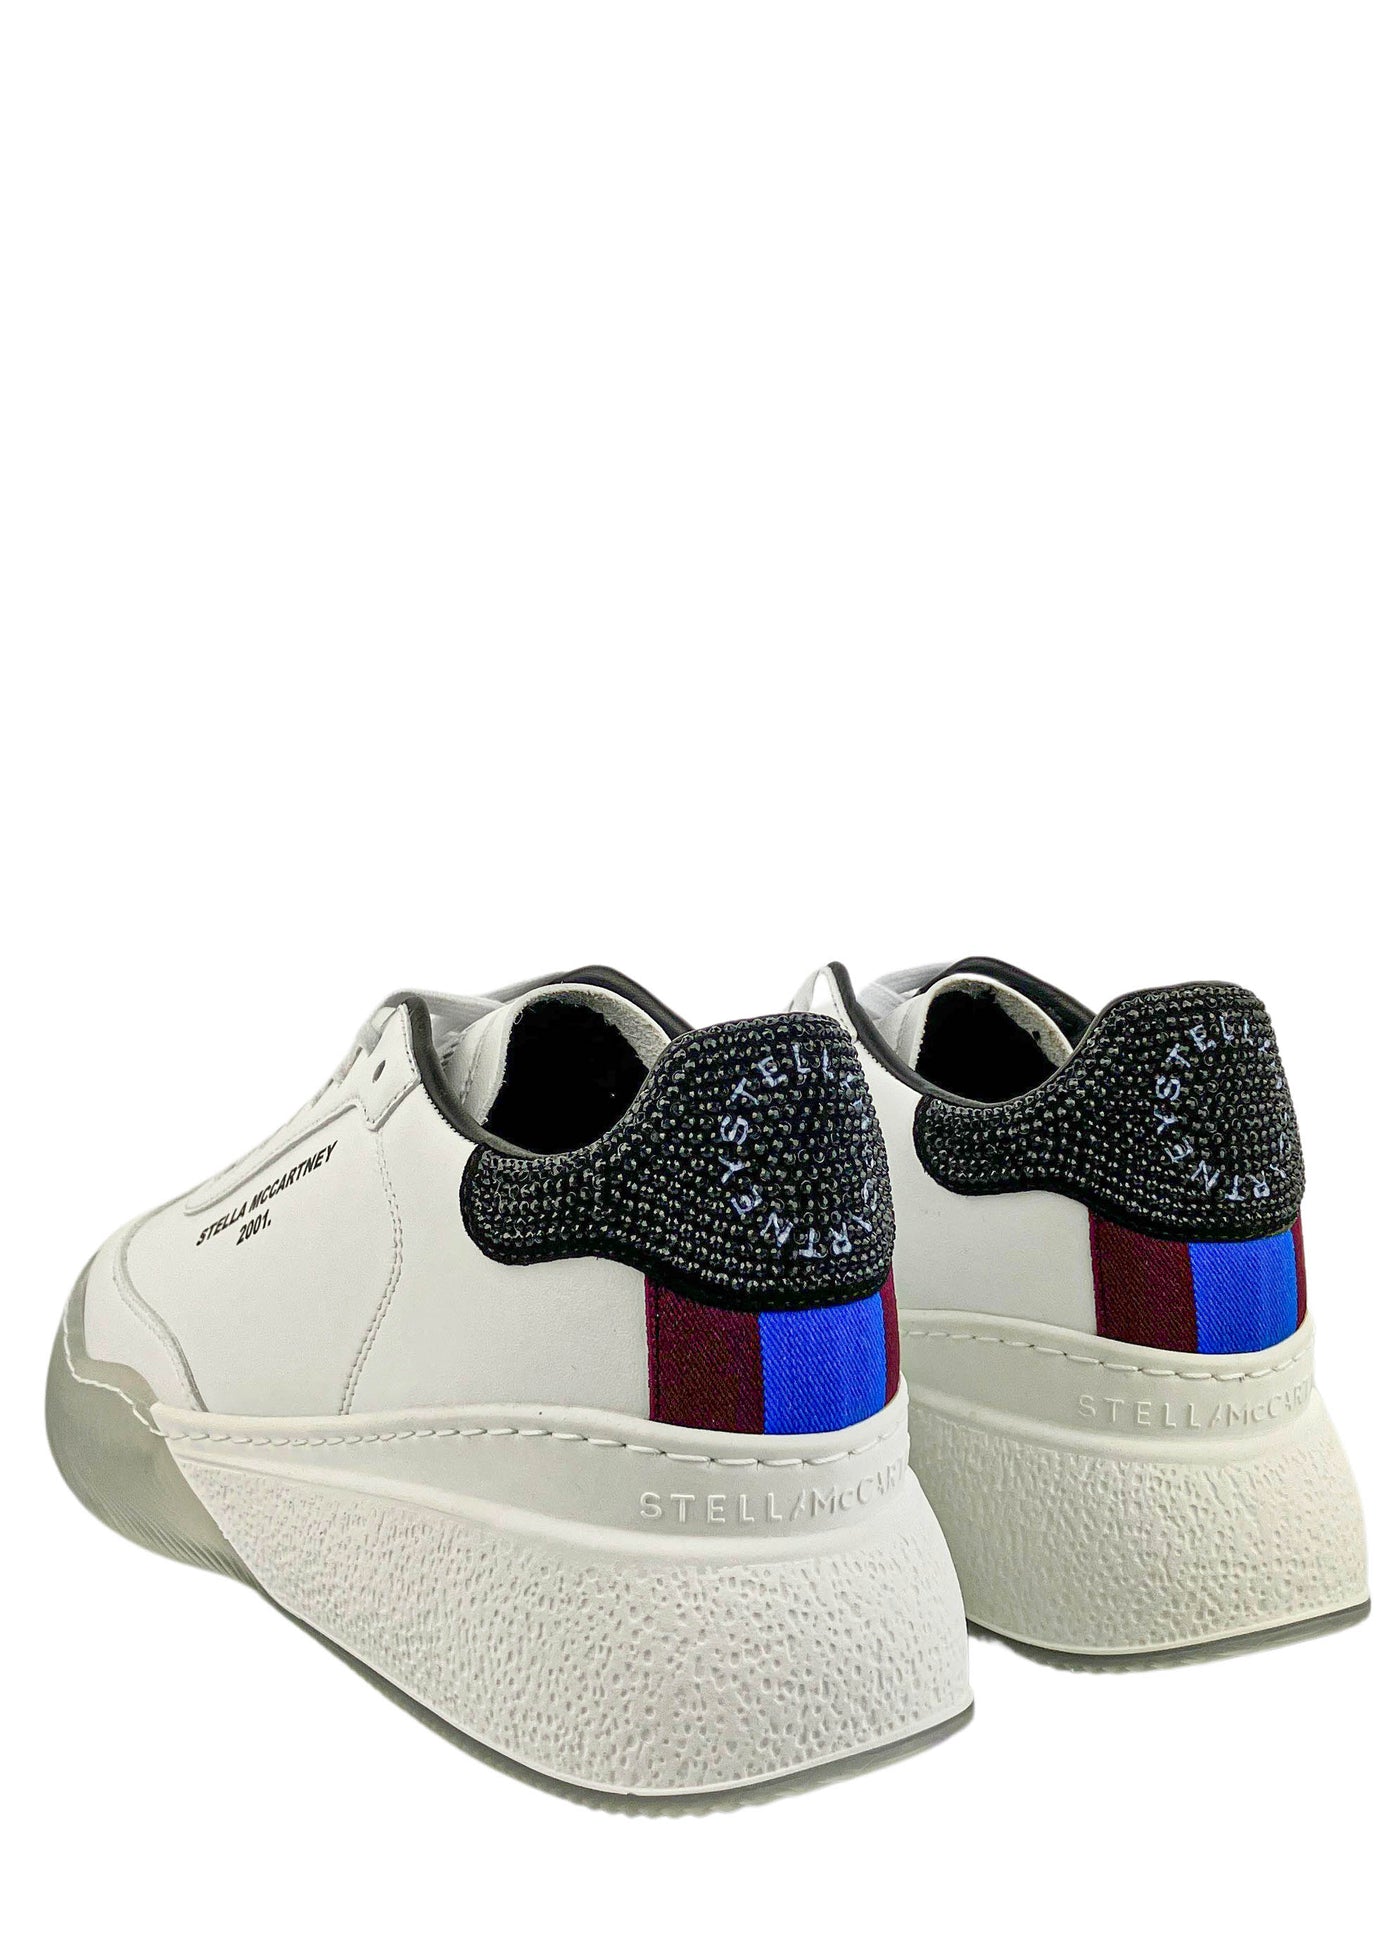 Stella McCartney Alter Sporty Crystal Logo Sneakers in White Black - Discounts on Stella McCartney at UAL